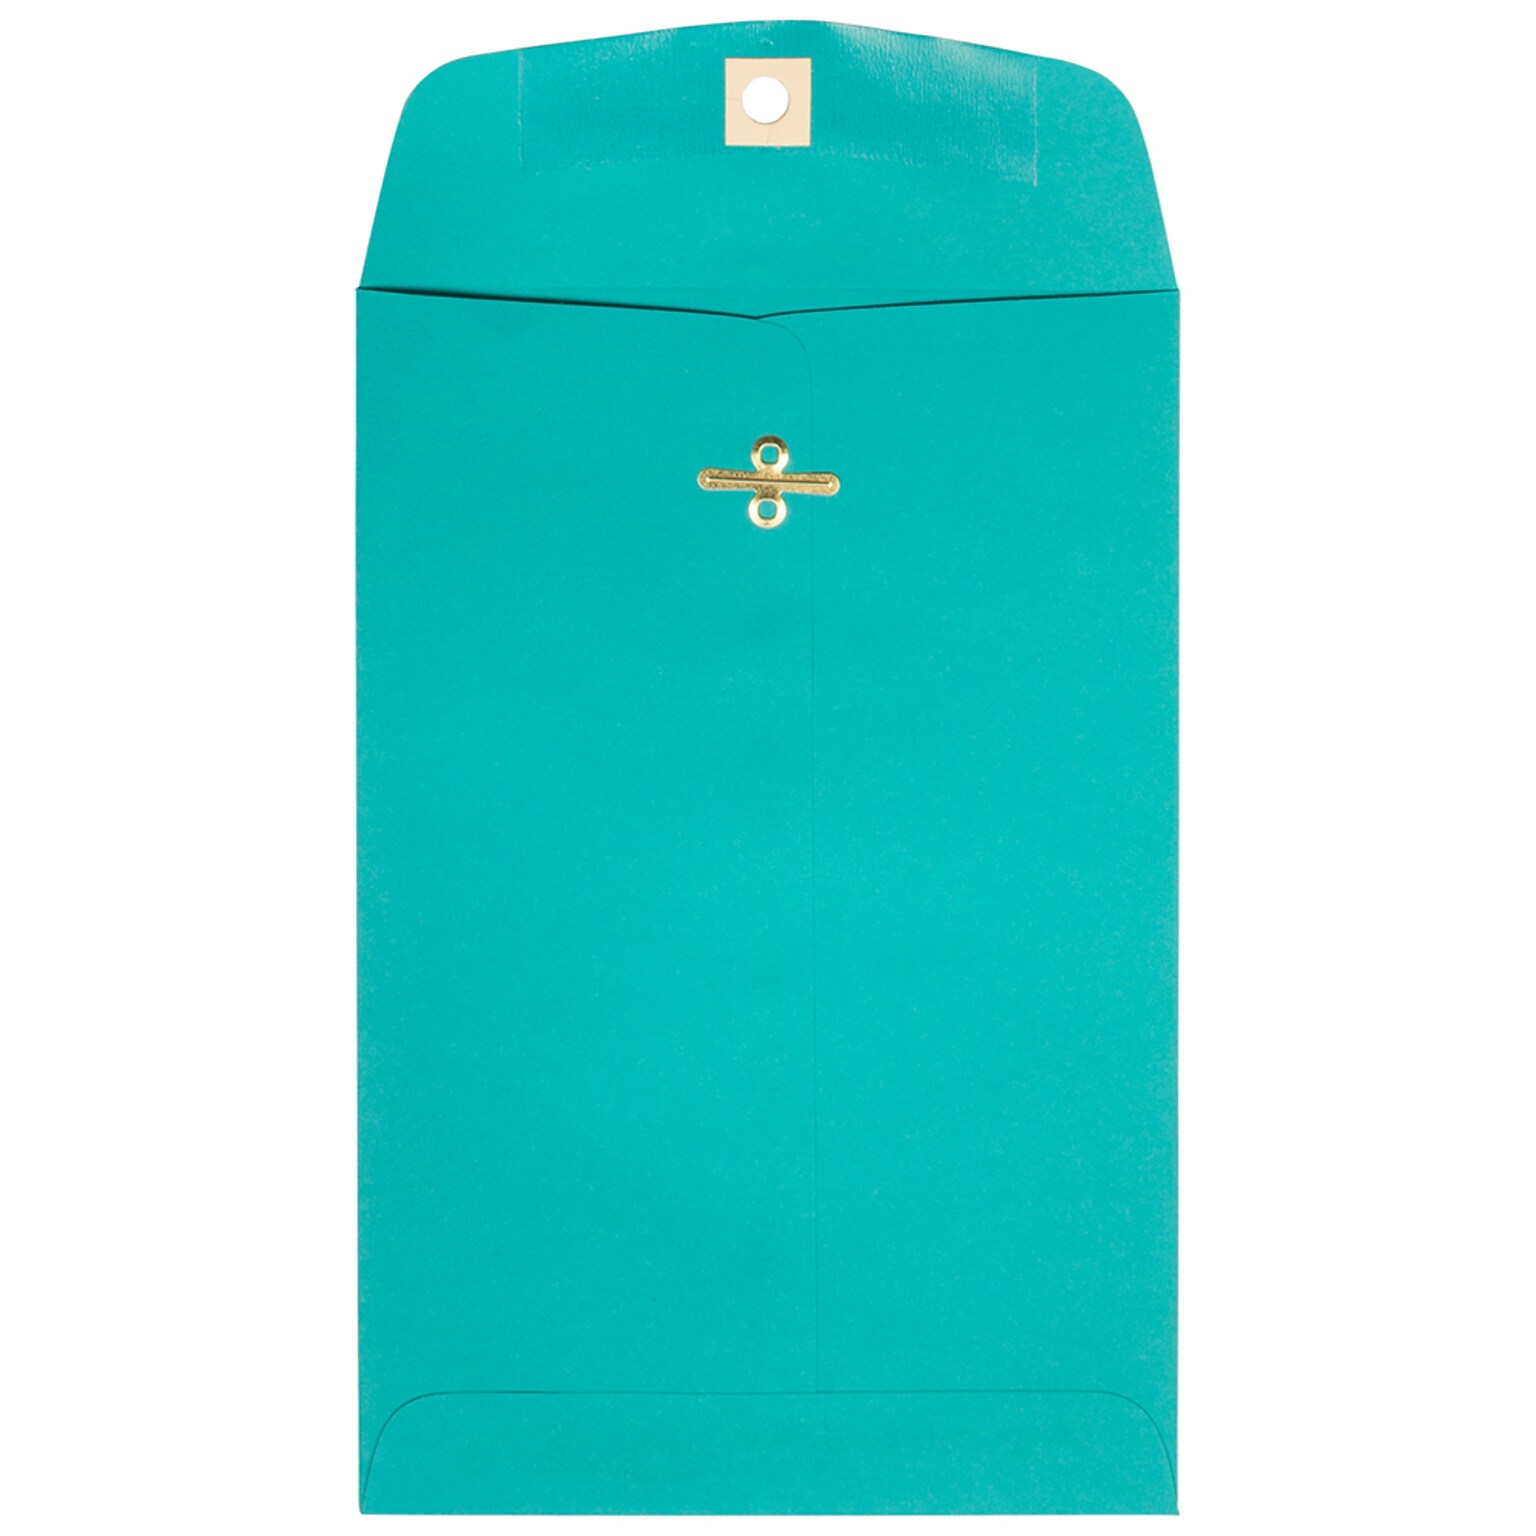 JAM Paper 6 x 9 Open End Catalog Colored Envelopes with Clasp Closure, Sea Blue Recycled, 100/Pack (900807461)